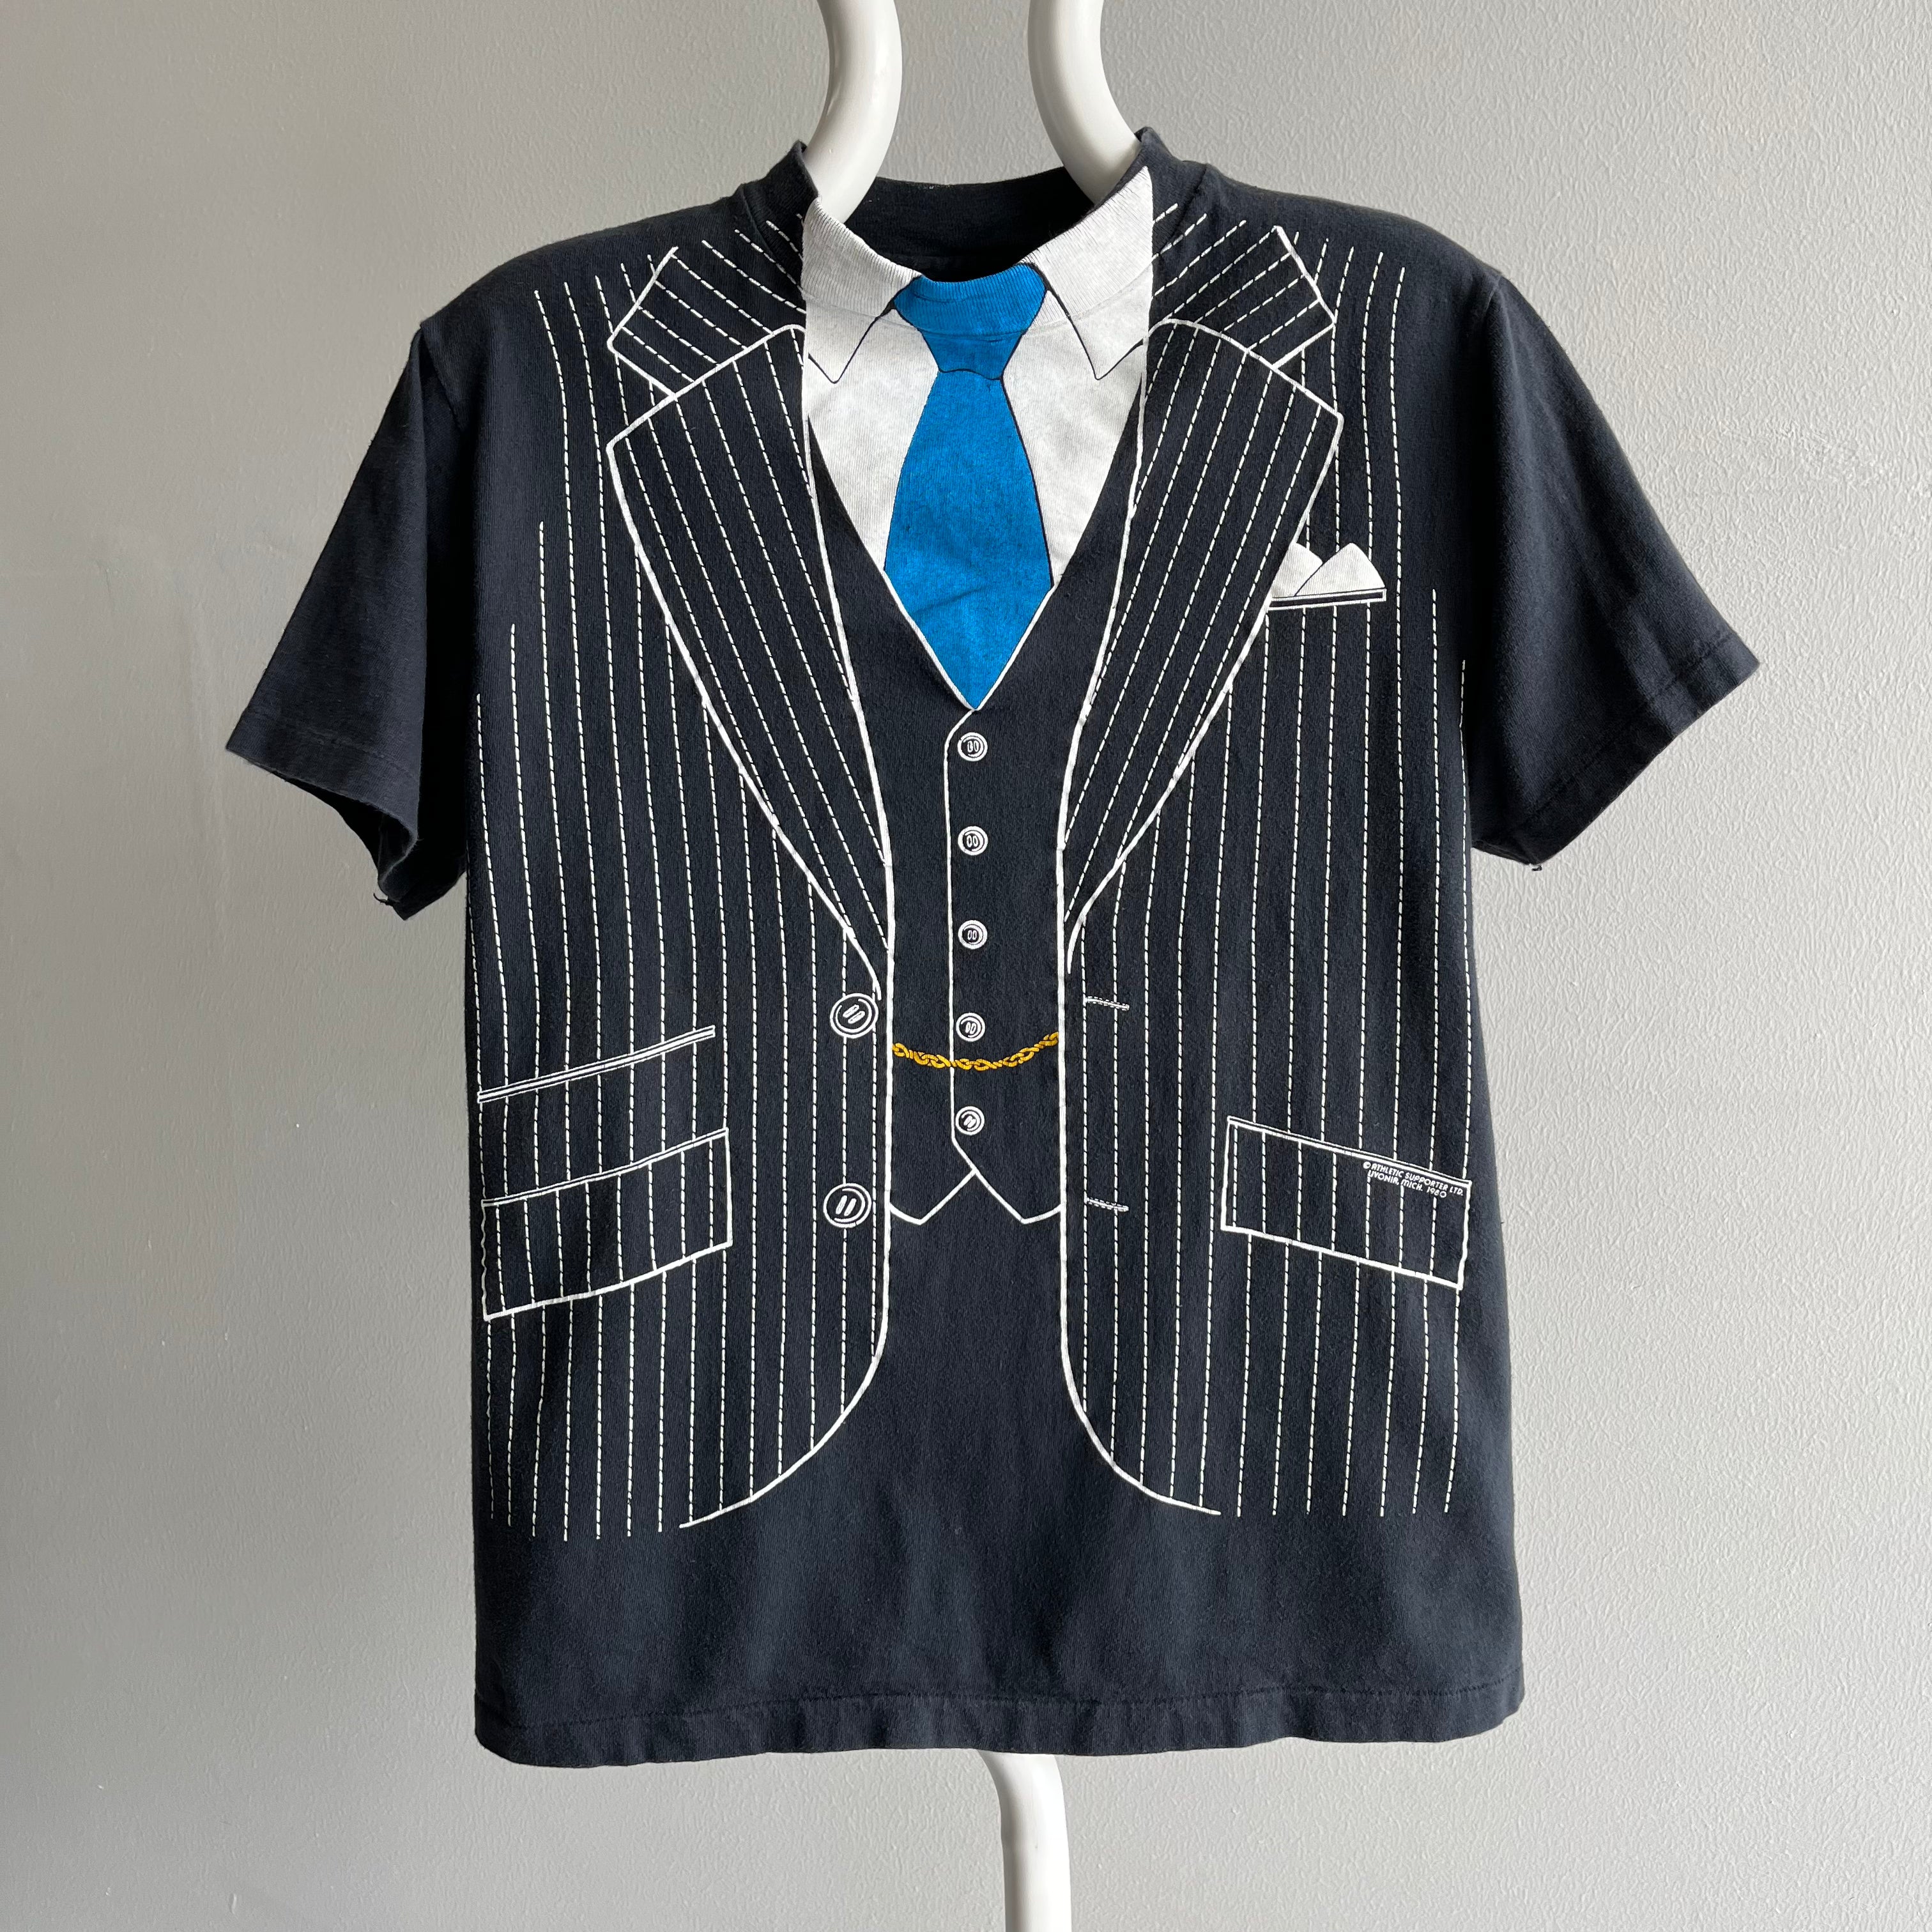 1980 Double Breasted Suit with A Blue Tie and A Mock Neck T-SHirt